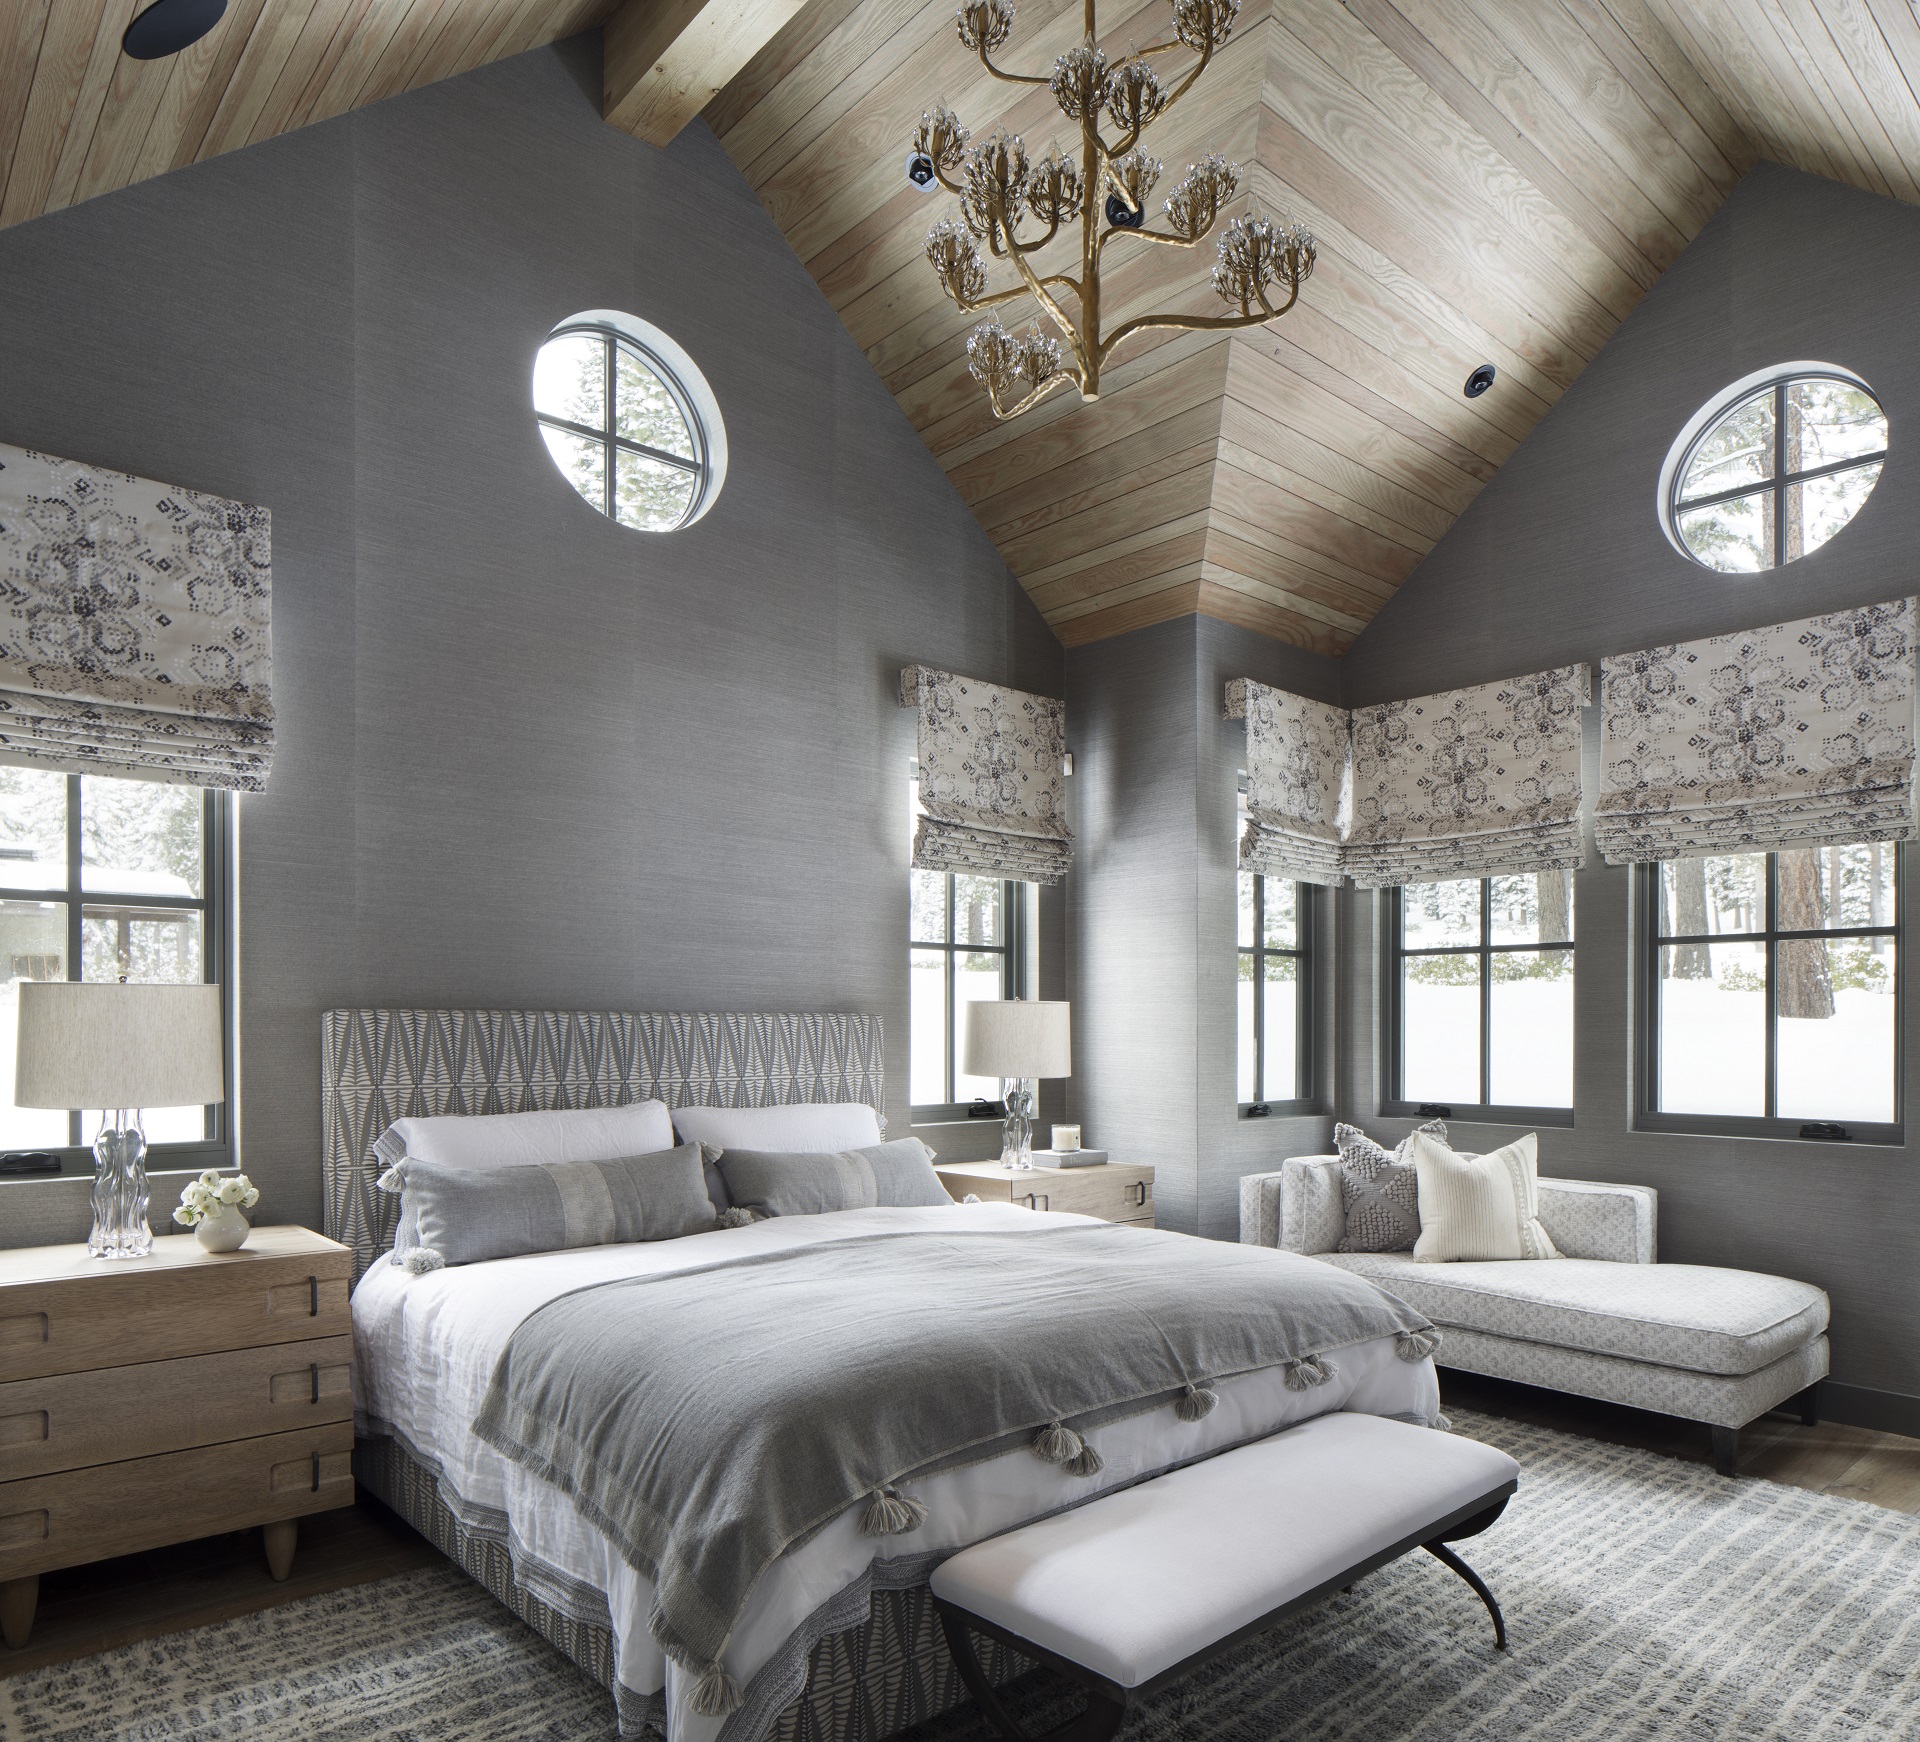 Patterned roman shades, grey upholstered headboard and custom linen bedding